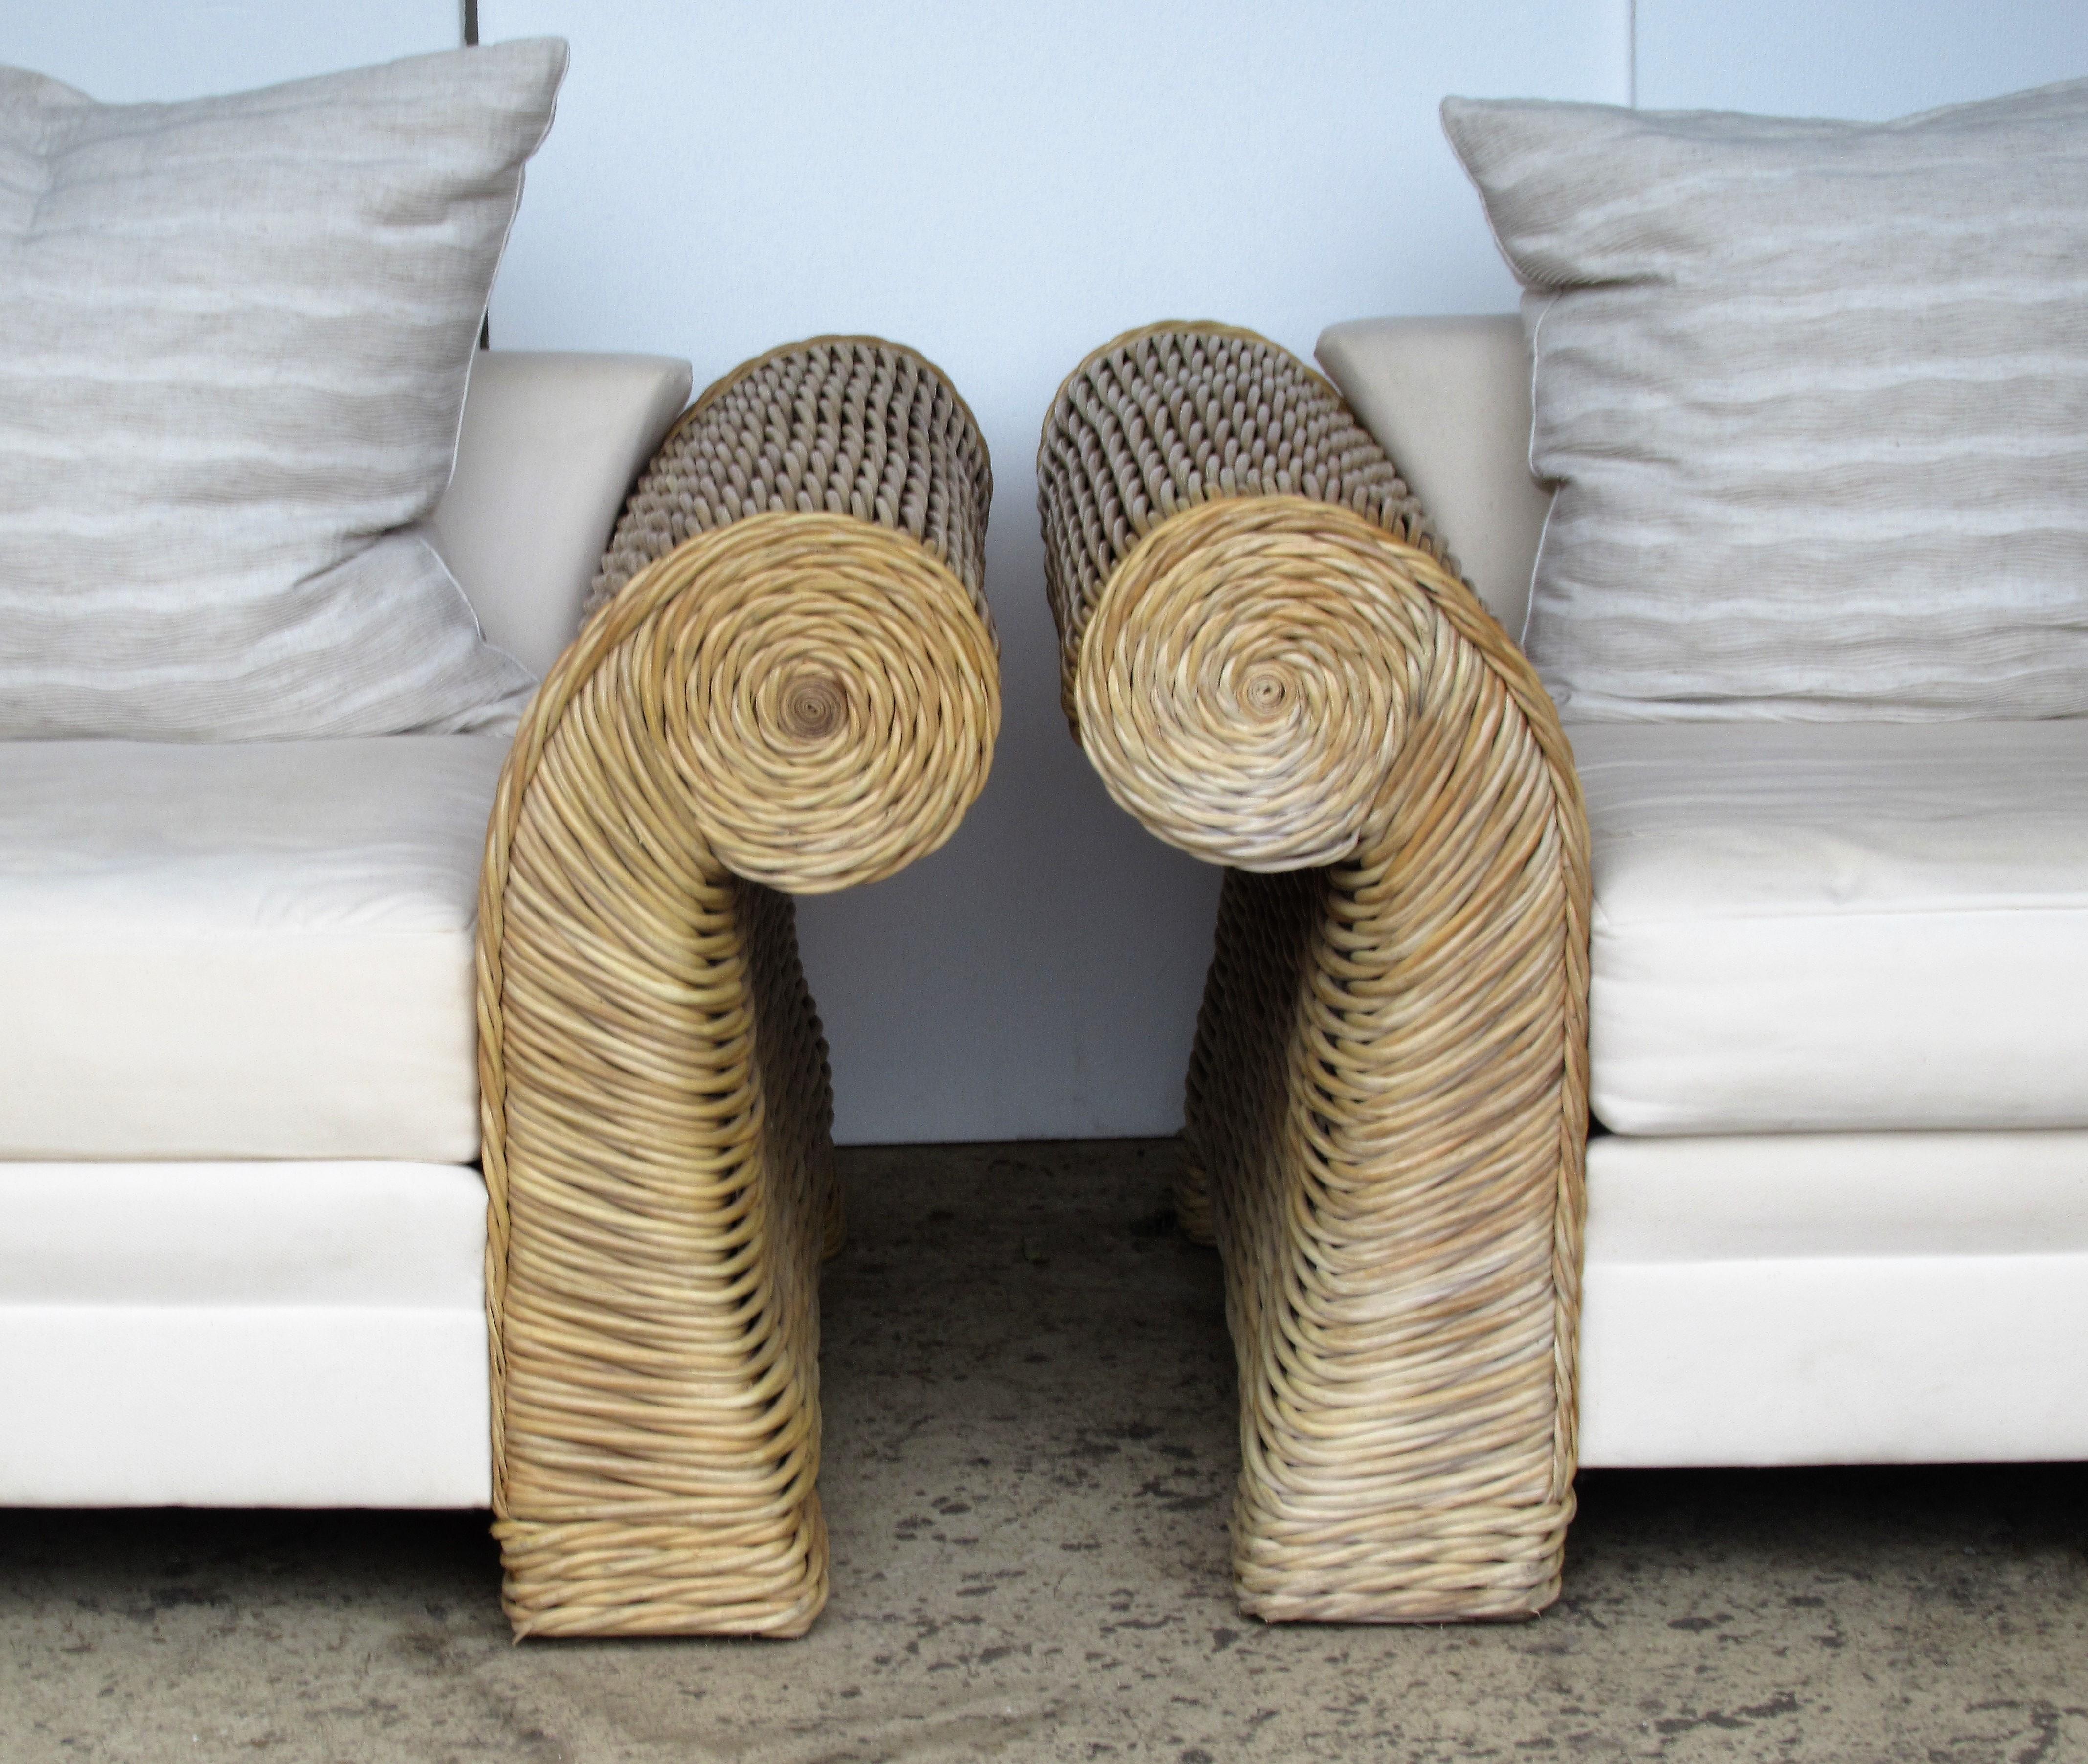 A pair of very large-scale natural woven rattan roll arm lounge chairs by O-Asian Designs, Inc., circa 1980. Exceptional quality heavy weight solid construction. Great looking pair of chairs with beautifully aged pale surface color and bold form.